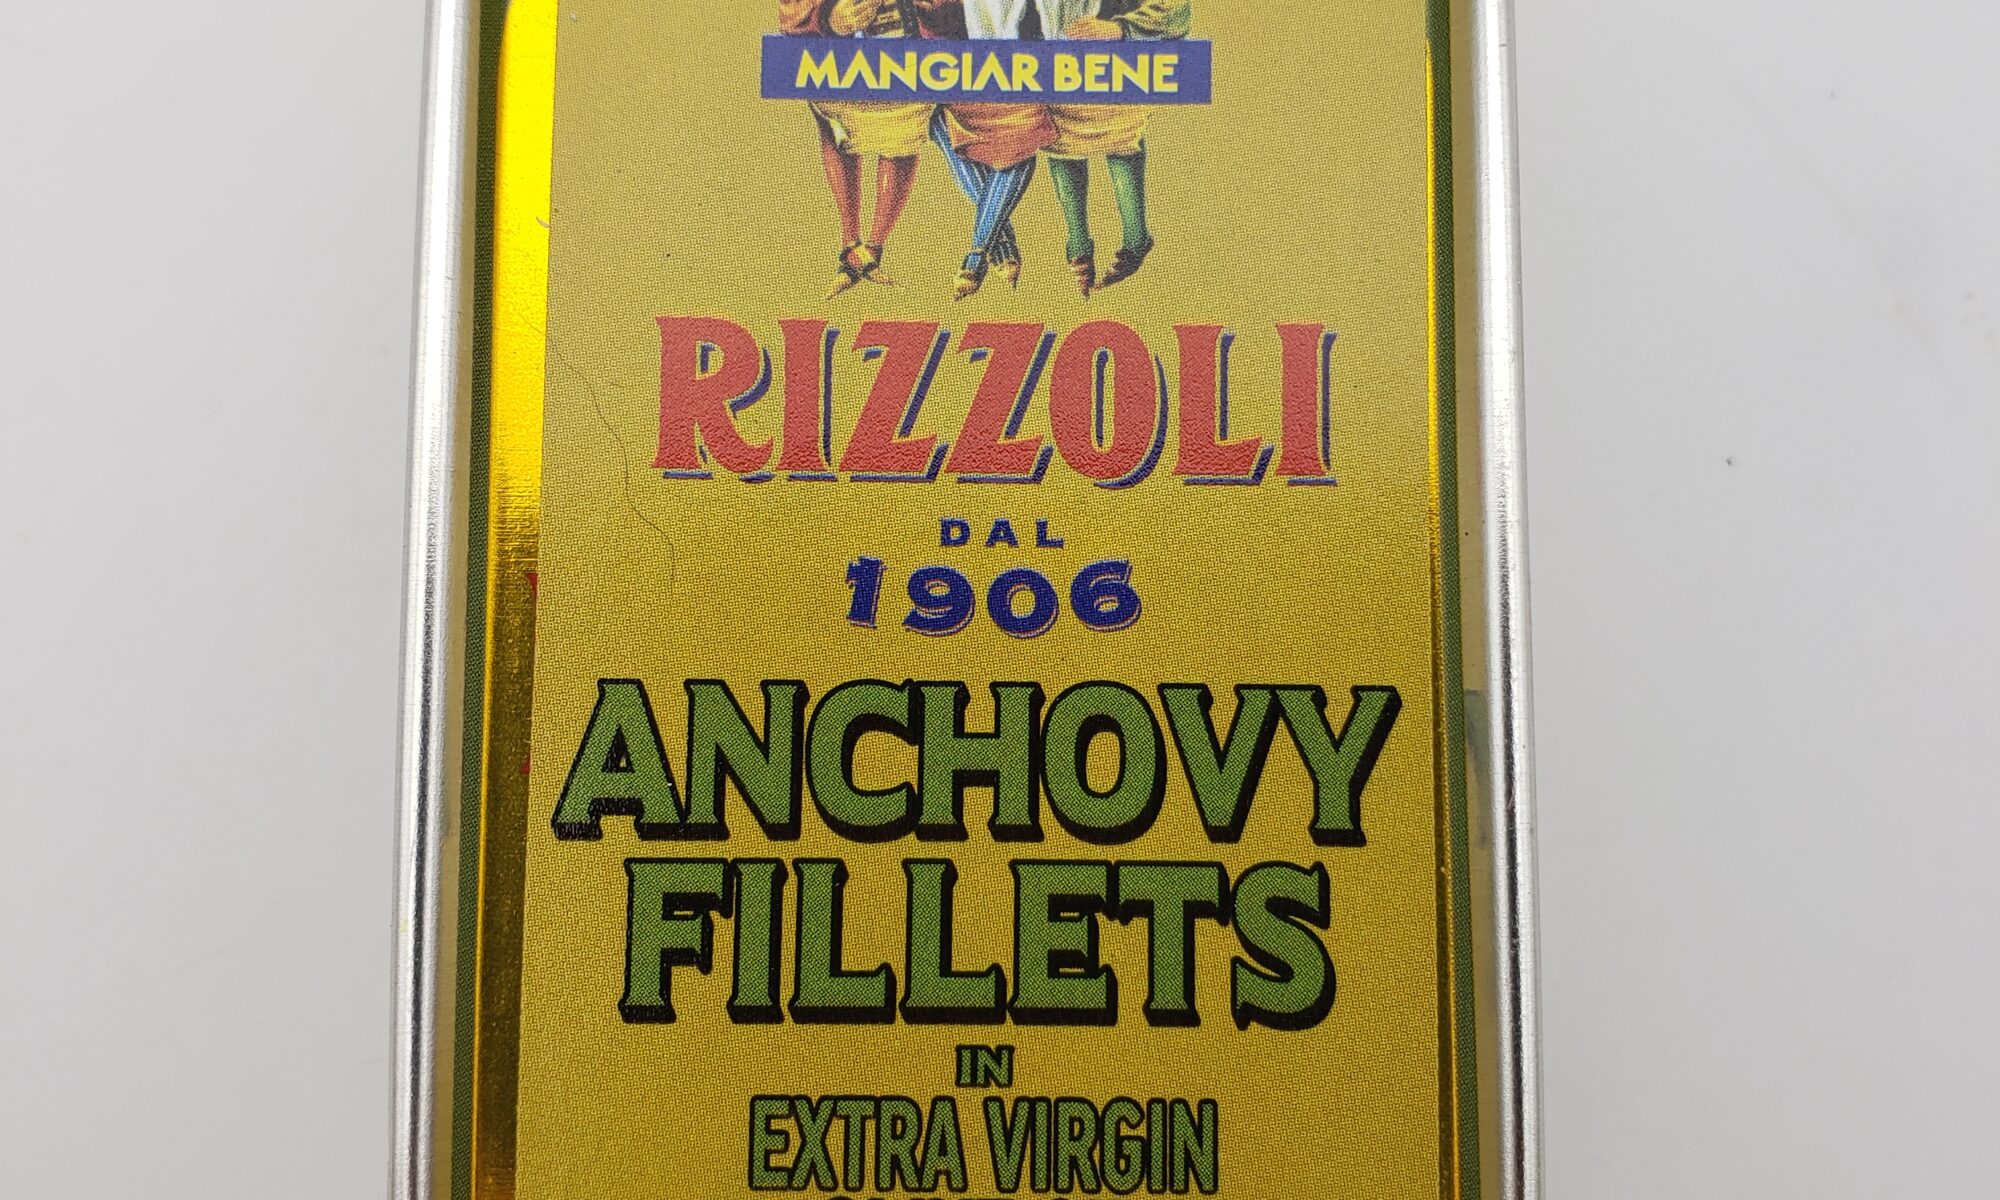 Image of Rizzoli anchovies in olive oil